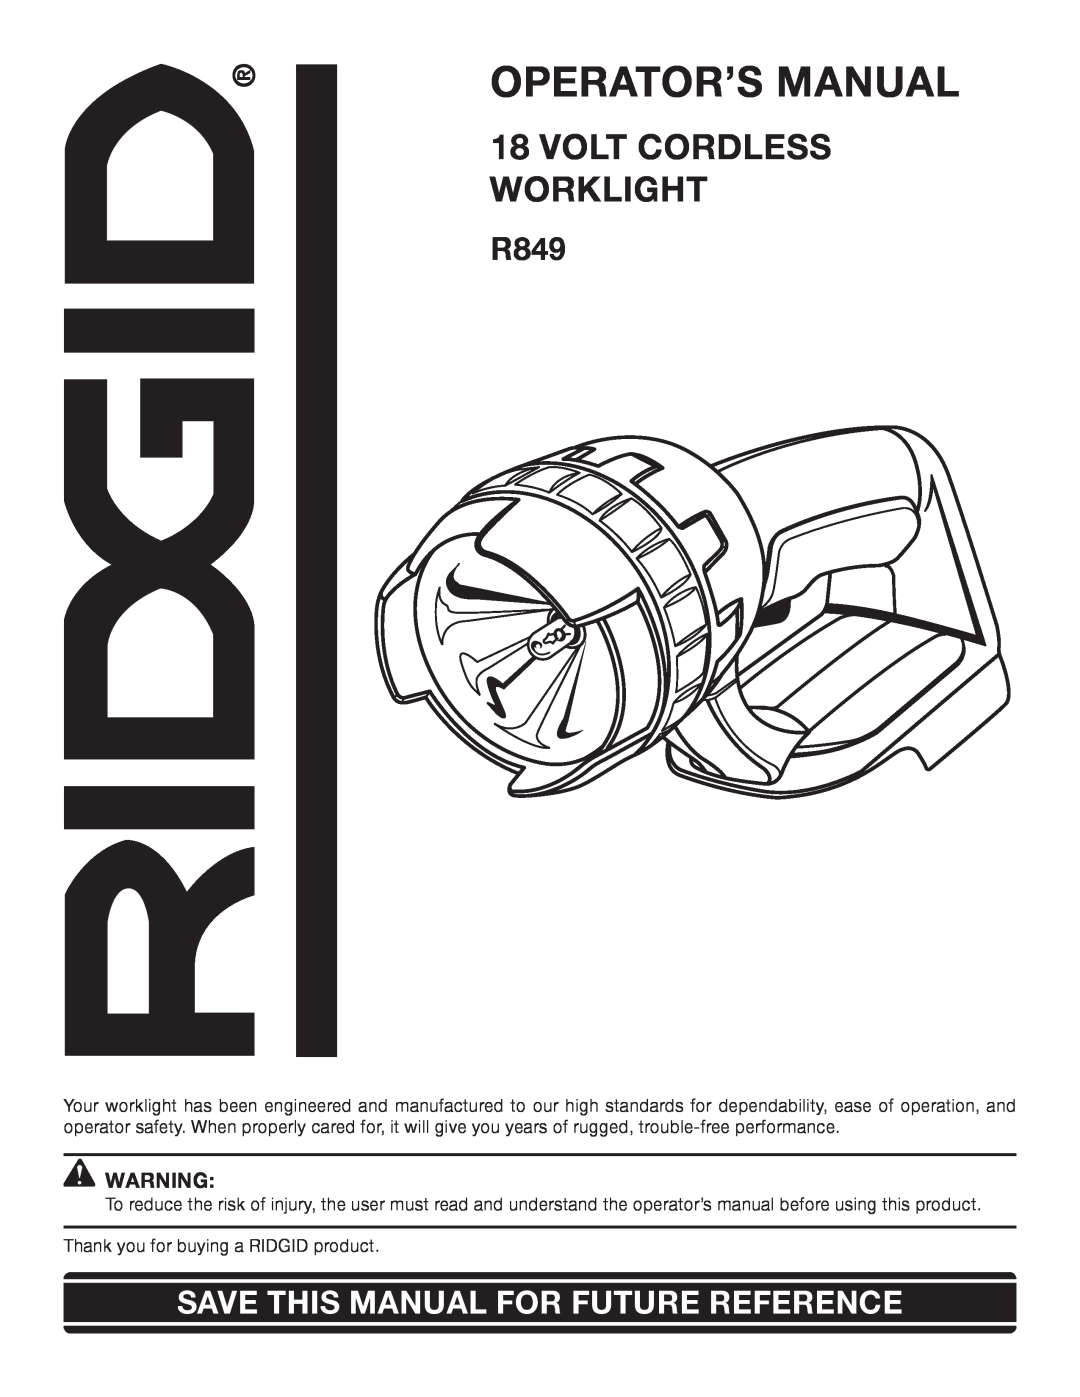 RIDGID R849 manual Operator’S Manual, Volt Cordless Worklight, Save This Manual For Future Reference 